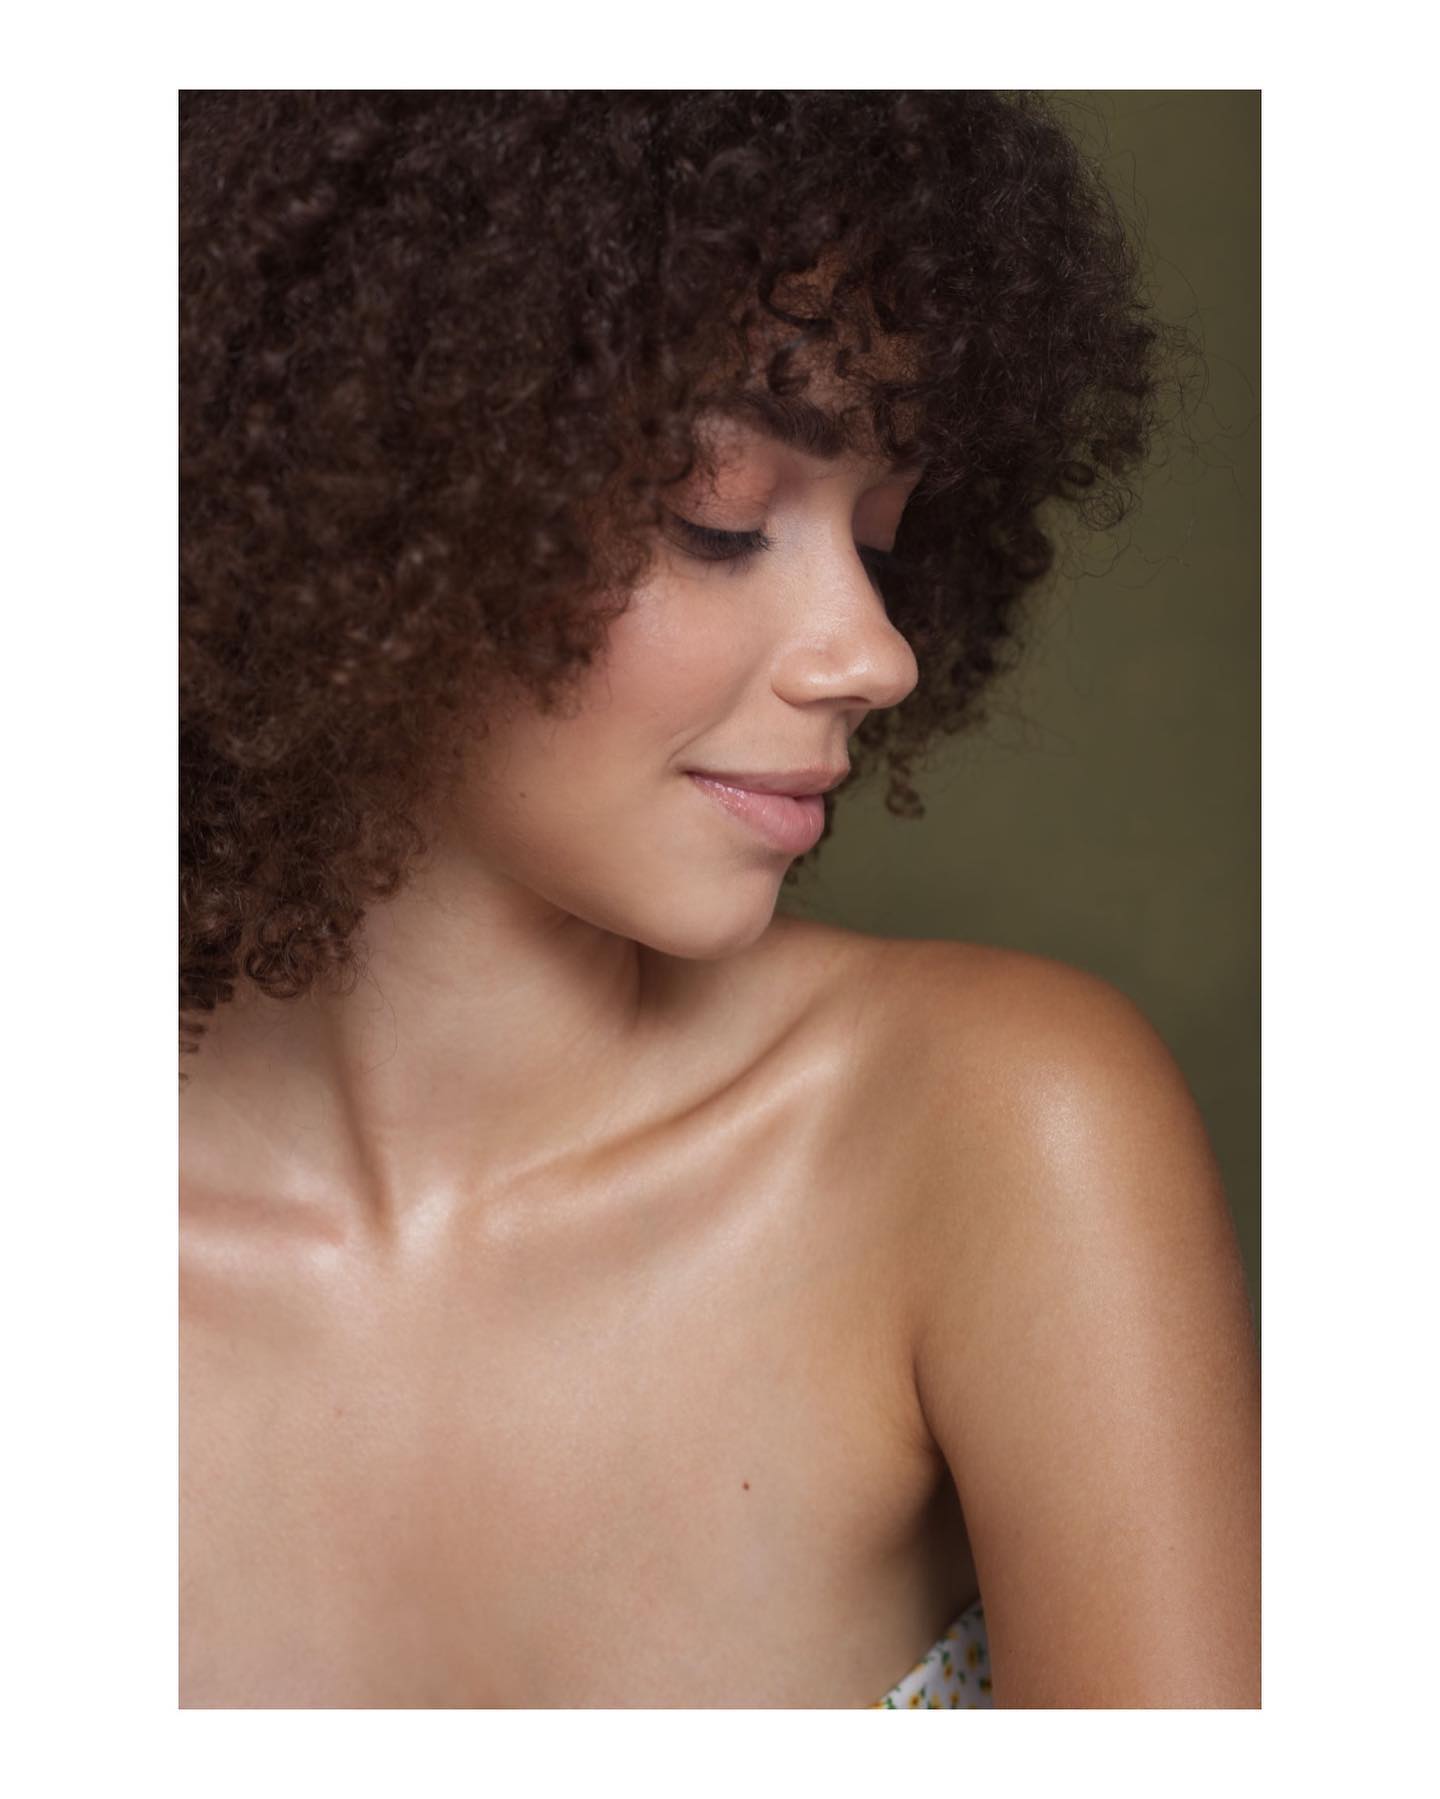 Moments in portraits. 
A little reminder that you. are. everything.

P.S. The category is COLLARBONES.

#beautyportrait #birthdayphotoshootideas #elizabethcitync #elizabethcity #hamptonroads #hamptonroadsva #norfolkva #chesapeakeva #virginiabeach #bighair #bighairbigdreams #bighairday